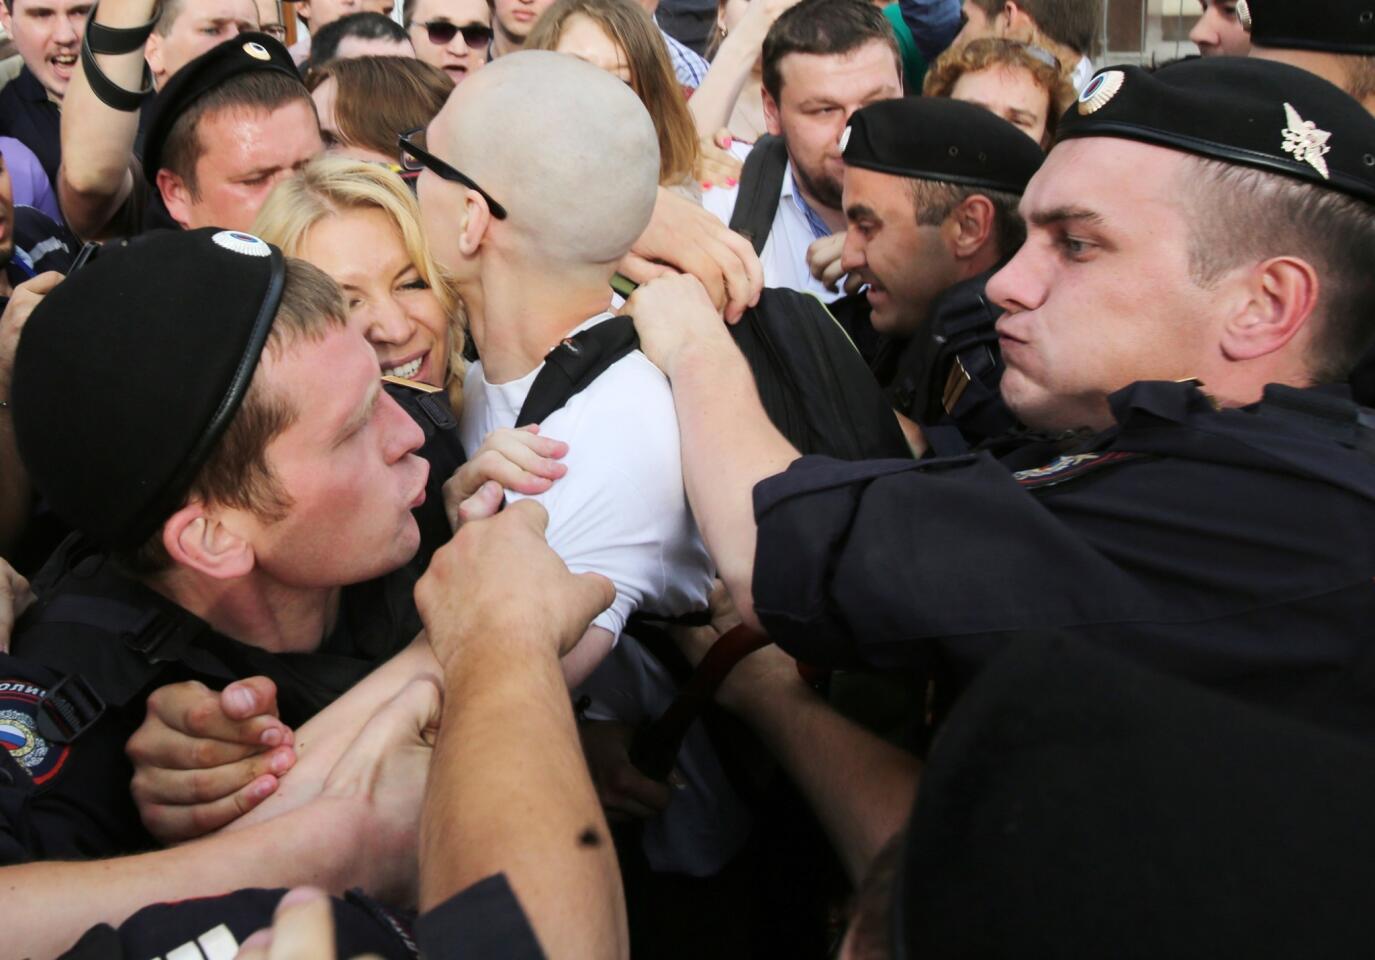 Riot police arrest a protester during a rally in support of opposition leader Alexei Navalny in downtown Moscow.